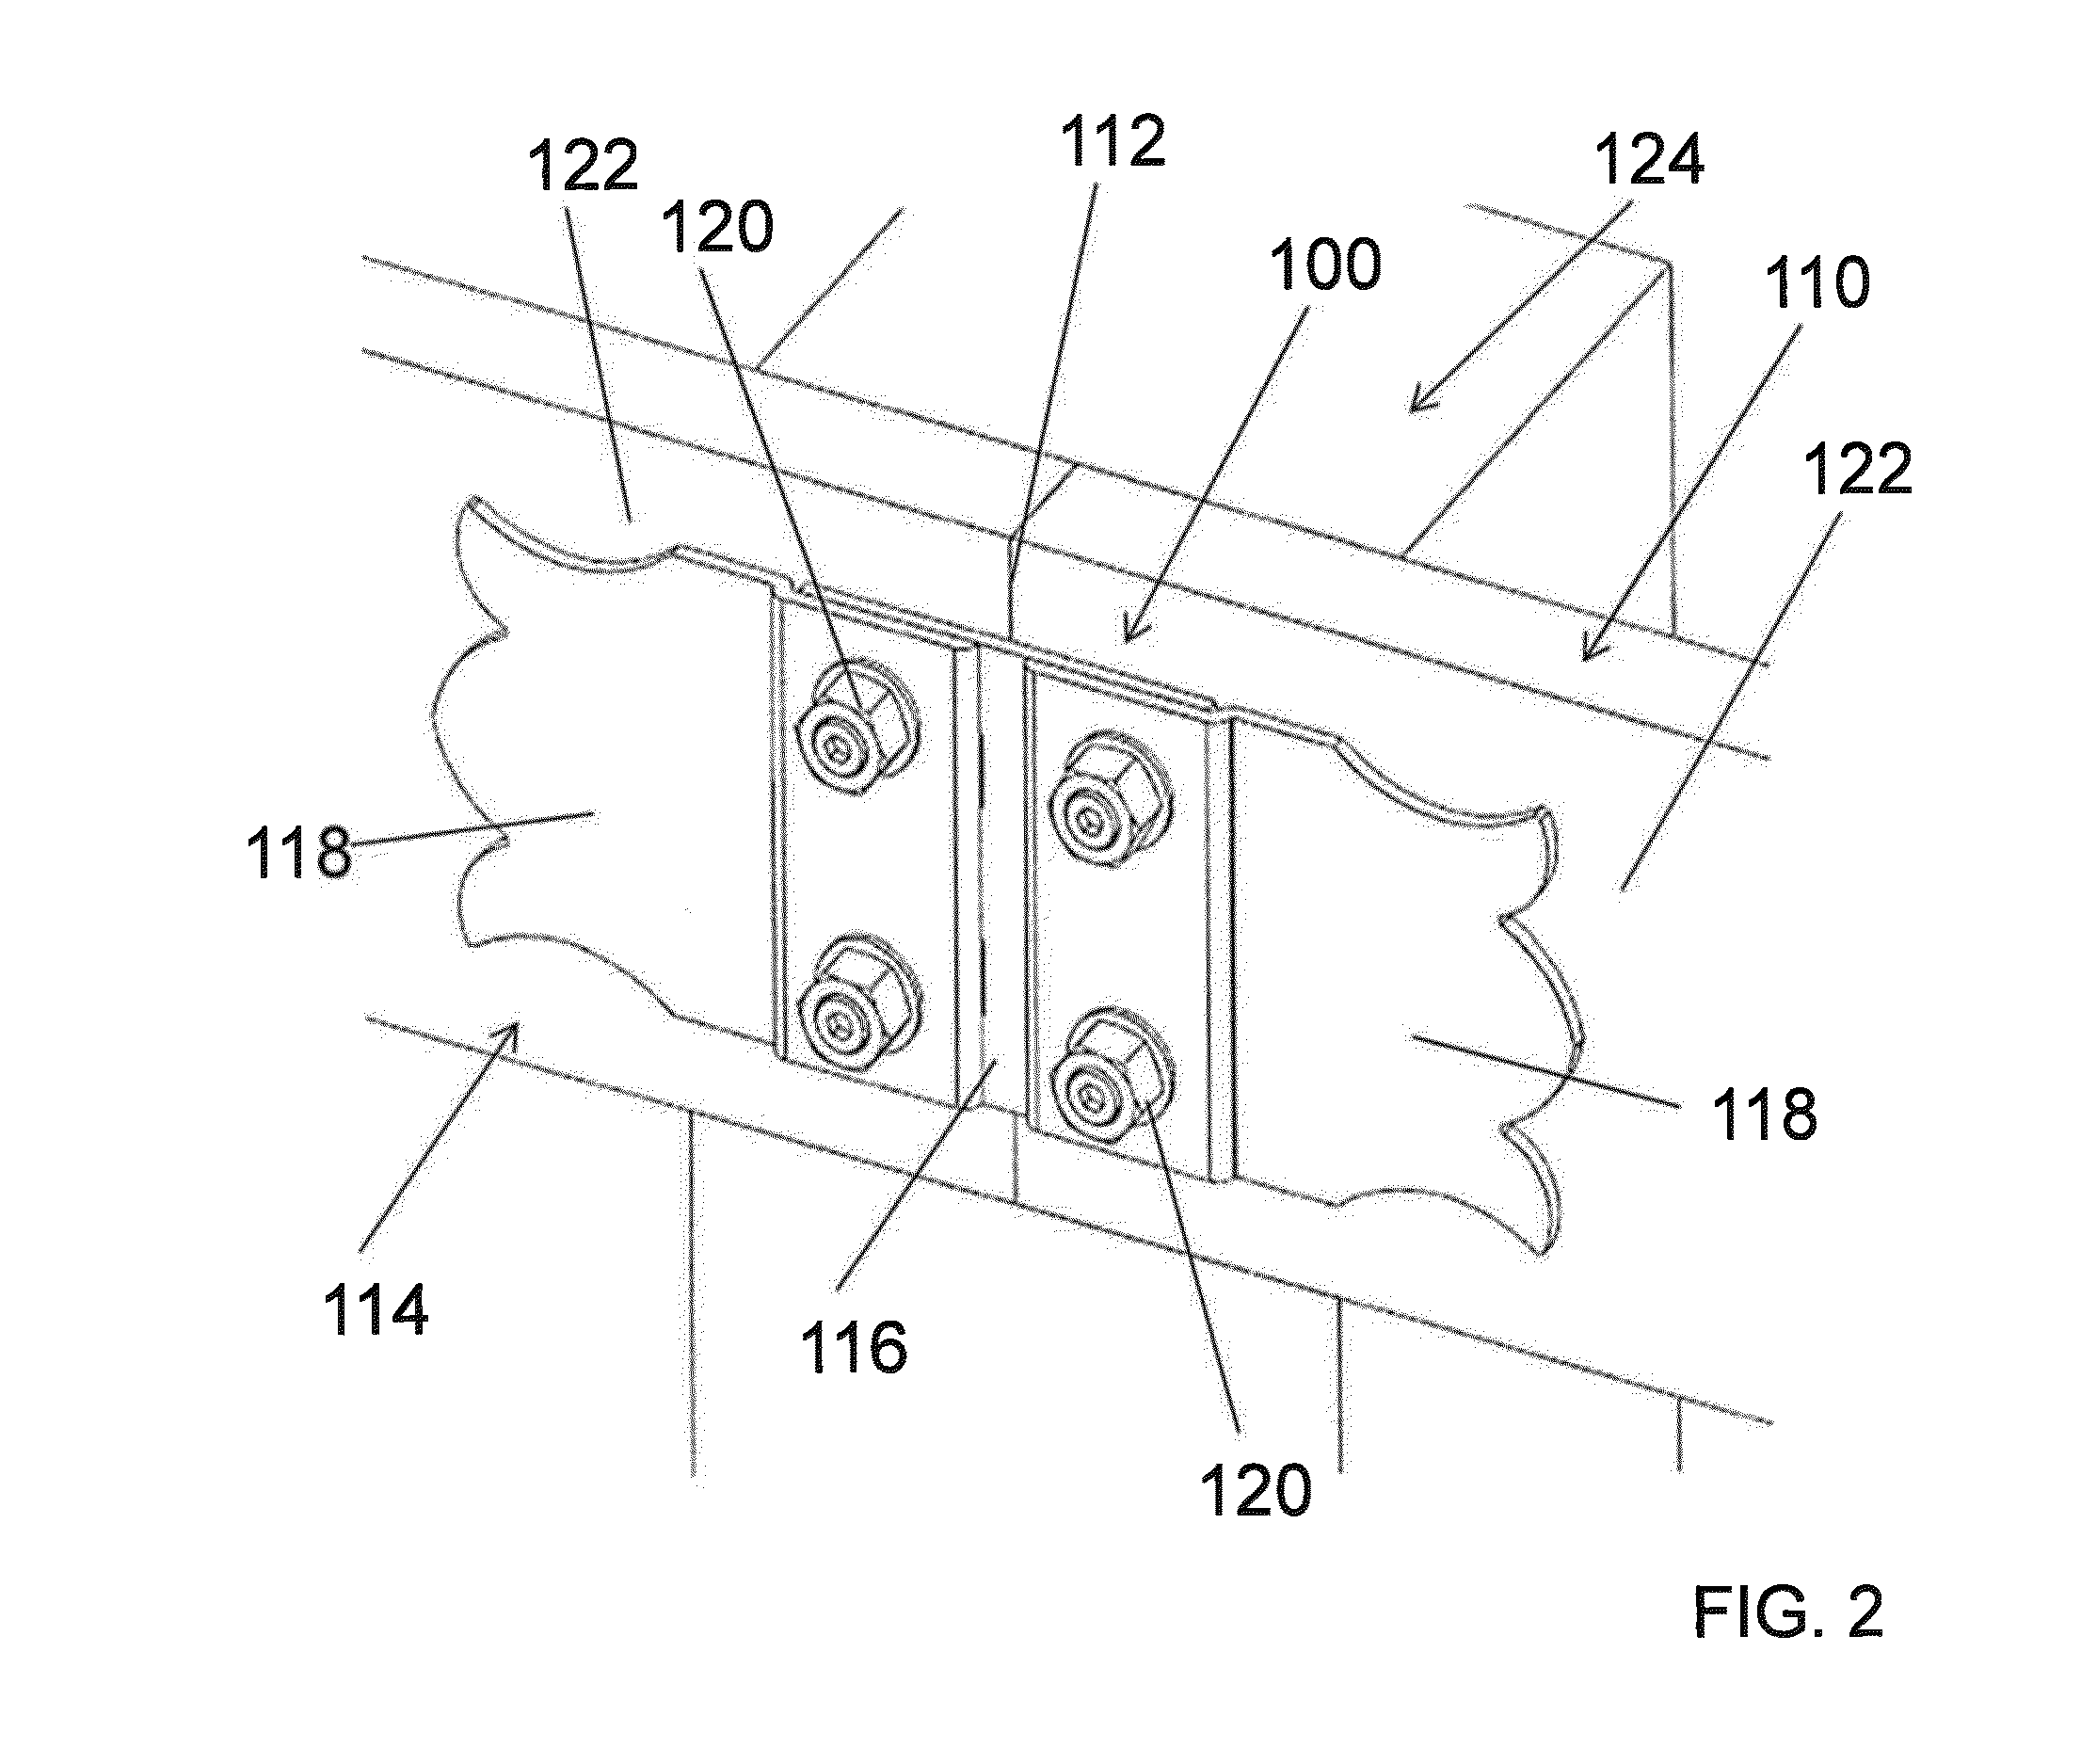 Multi-piece truss plate for use in joining two structural members